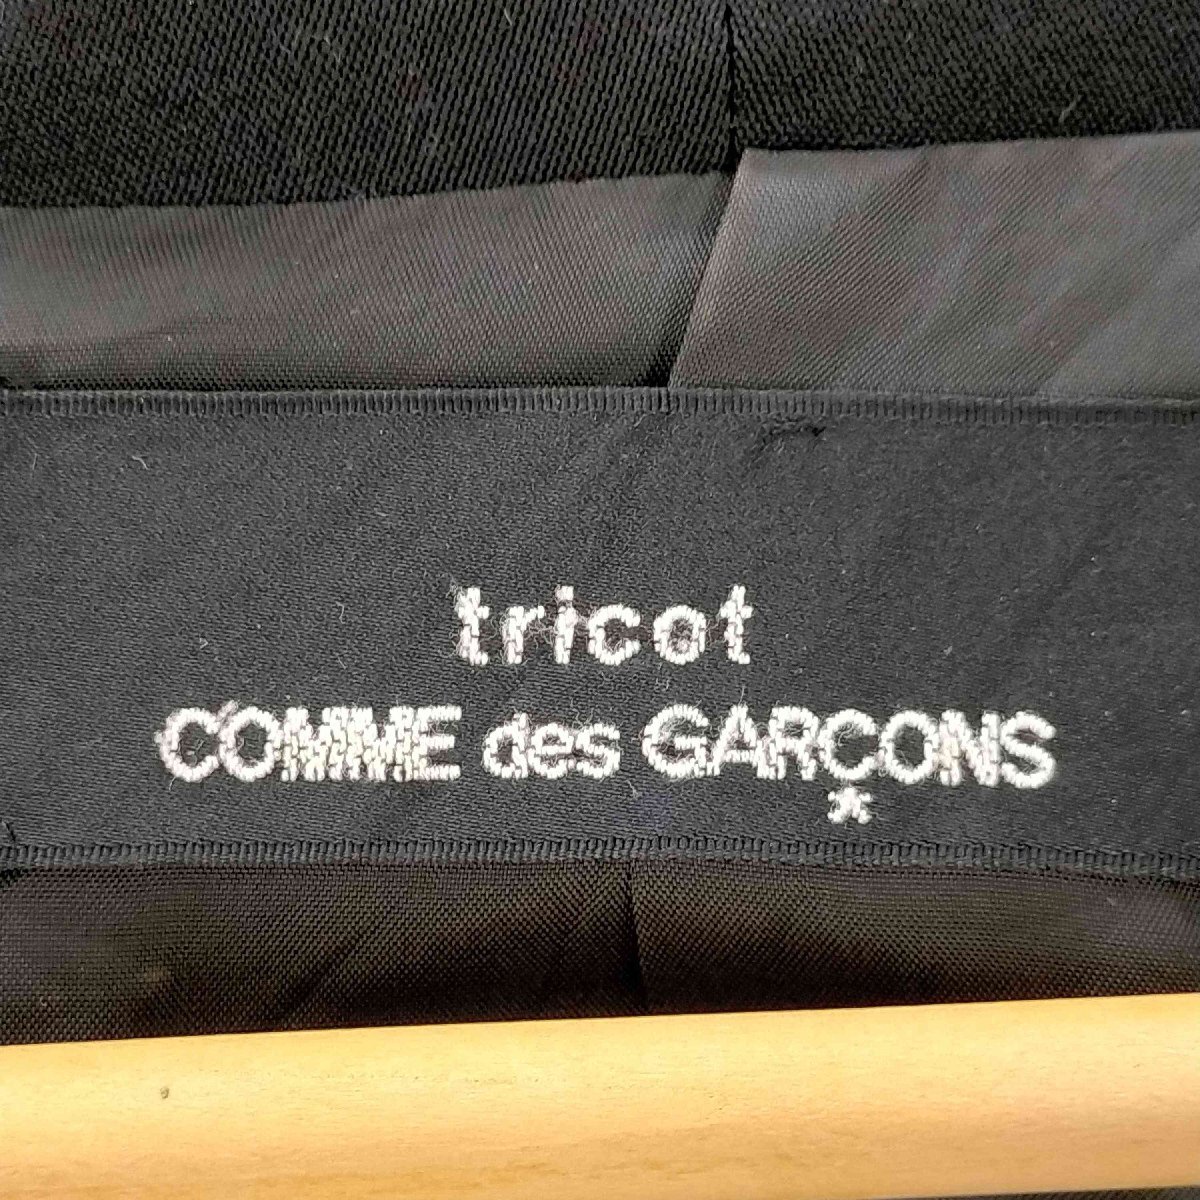 tricot COMME des GARCONS(トリココムデギャルソン) 80S ウール 短丈 ボレロ 中古 古着 0205の画像6